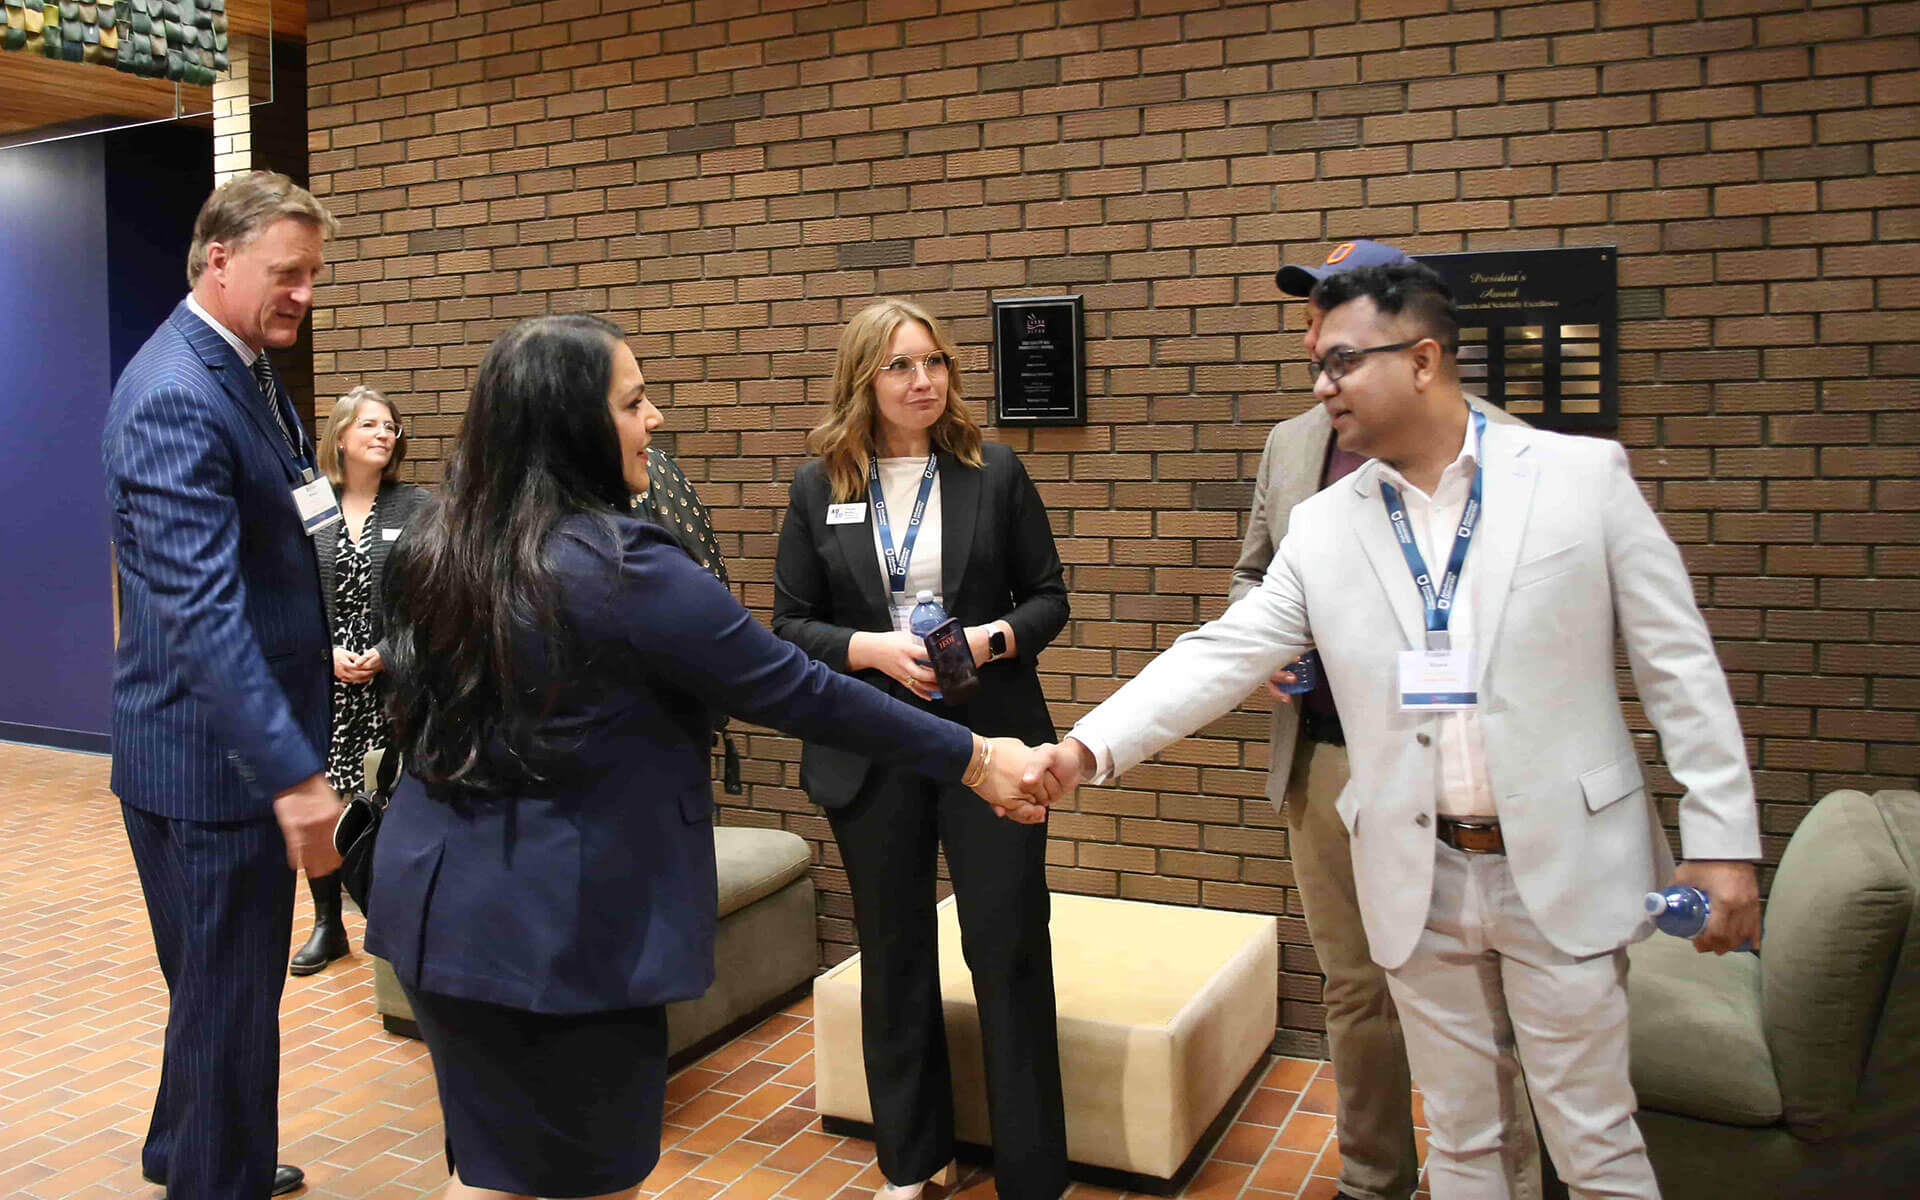 Rajan Sawhney shakes hands with an Athabasca University student